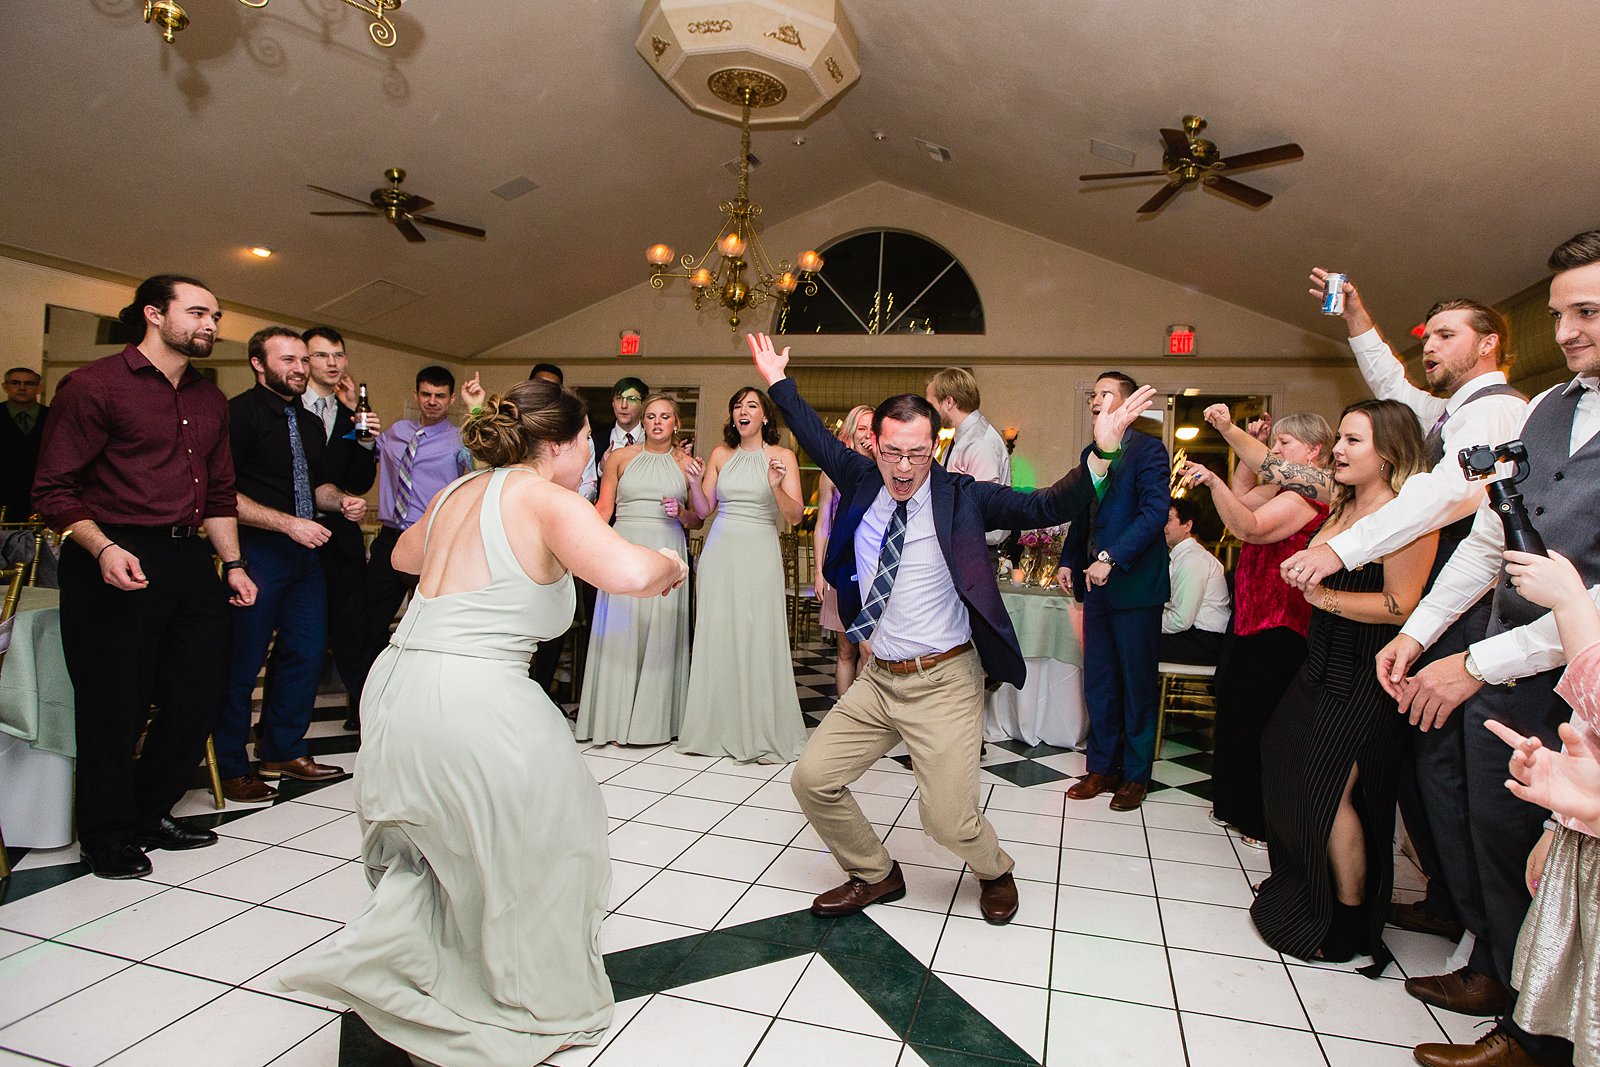 Guests at The Wright House wedding reception by Mesa wedding photographer PMA Photography